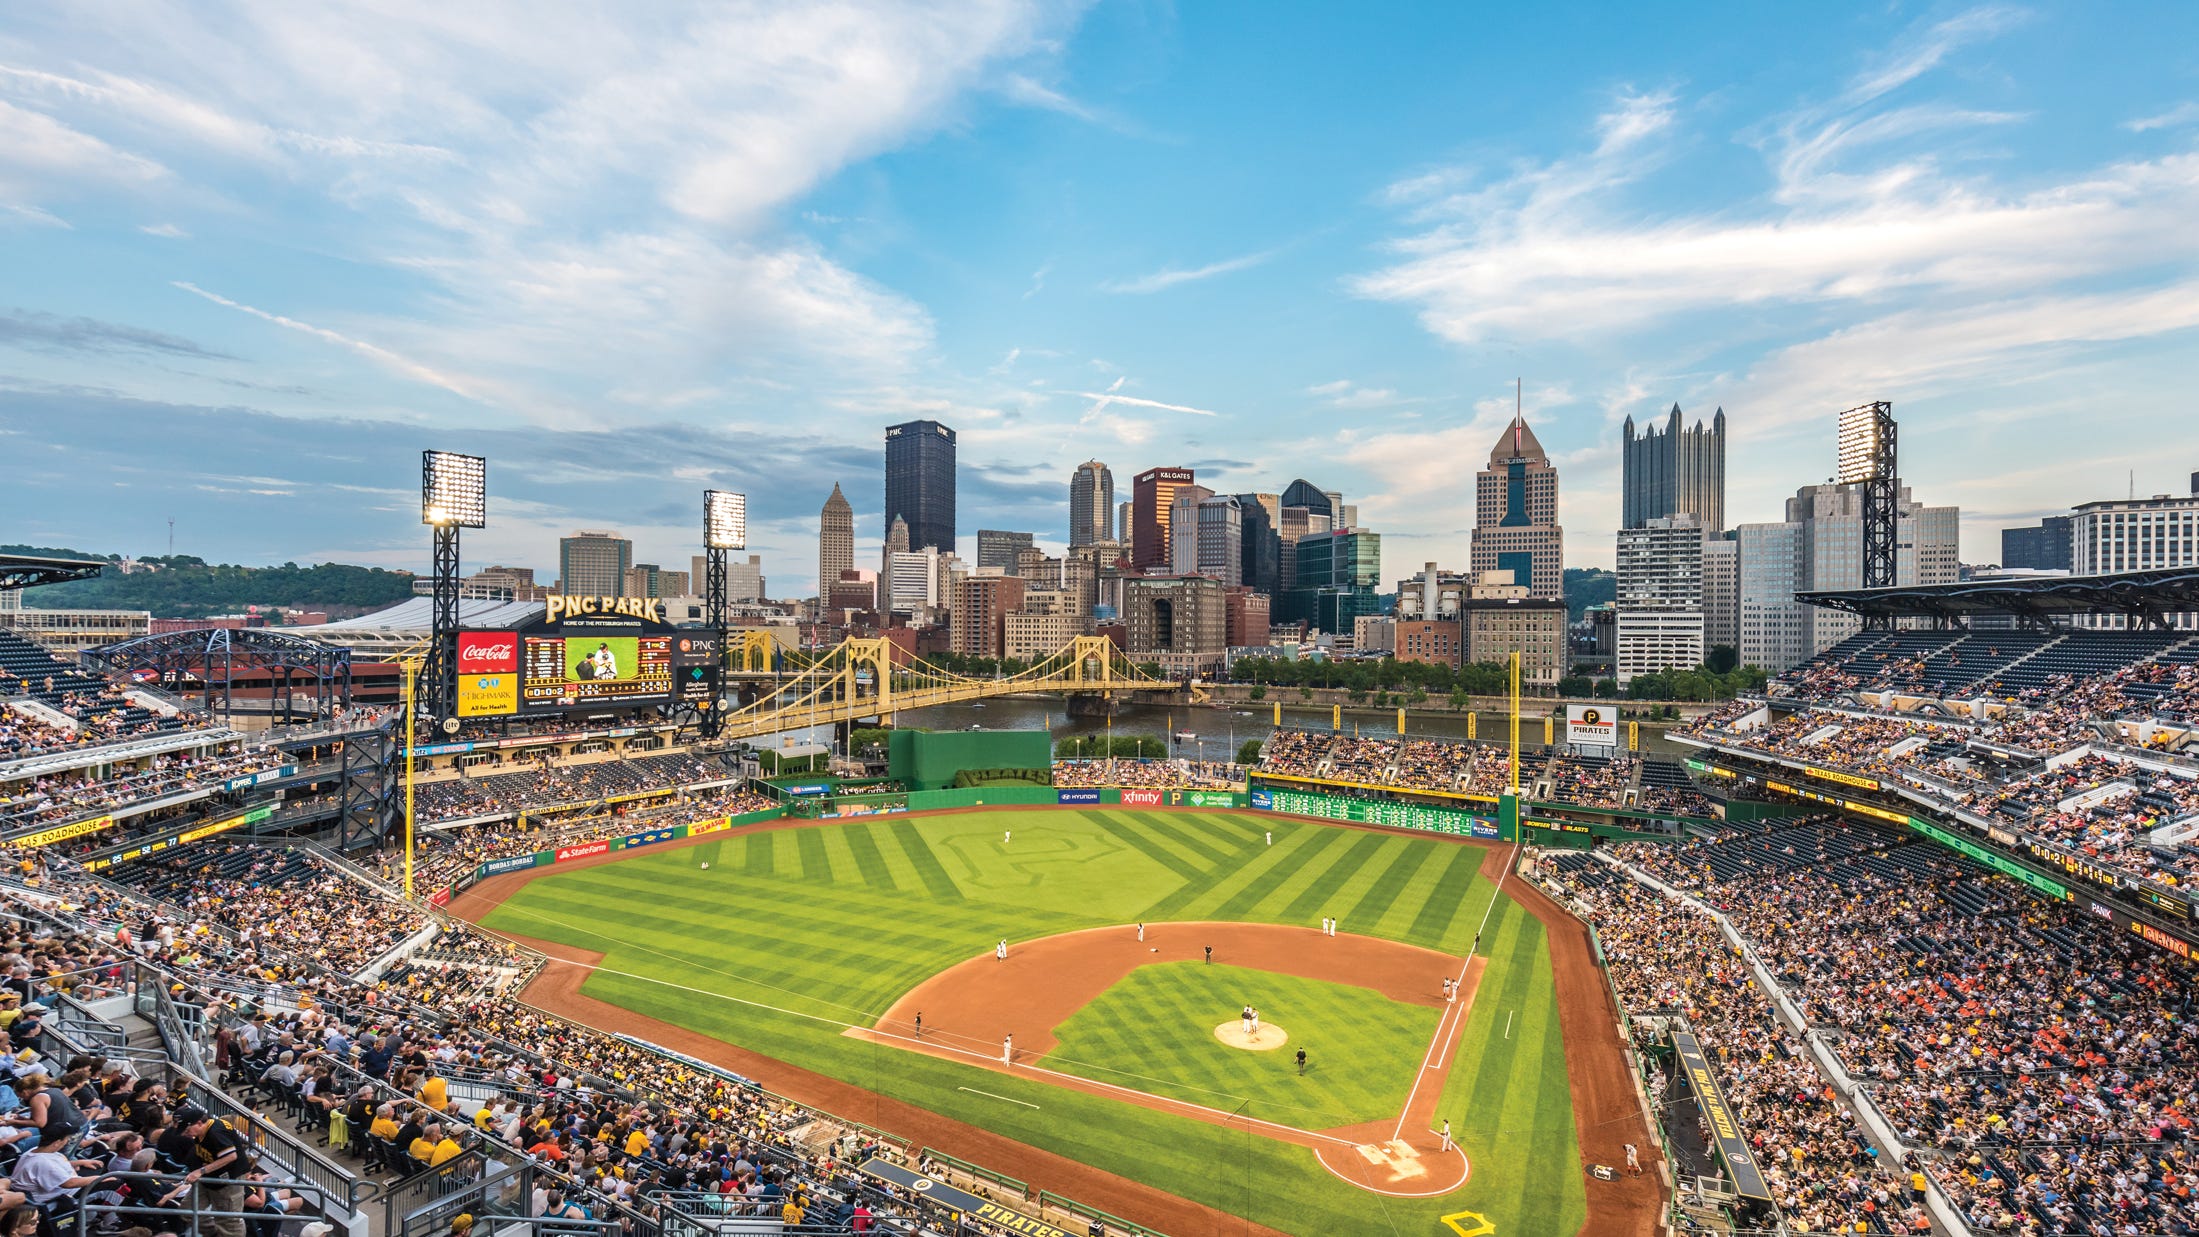 An Ode to PNC Park, the Ball Field of the Pittsburgh Pirates